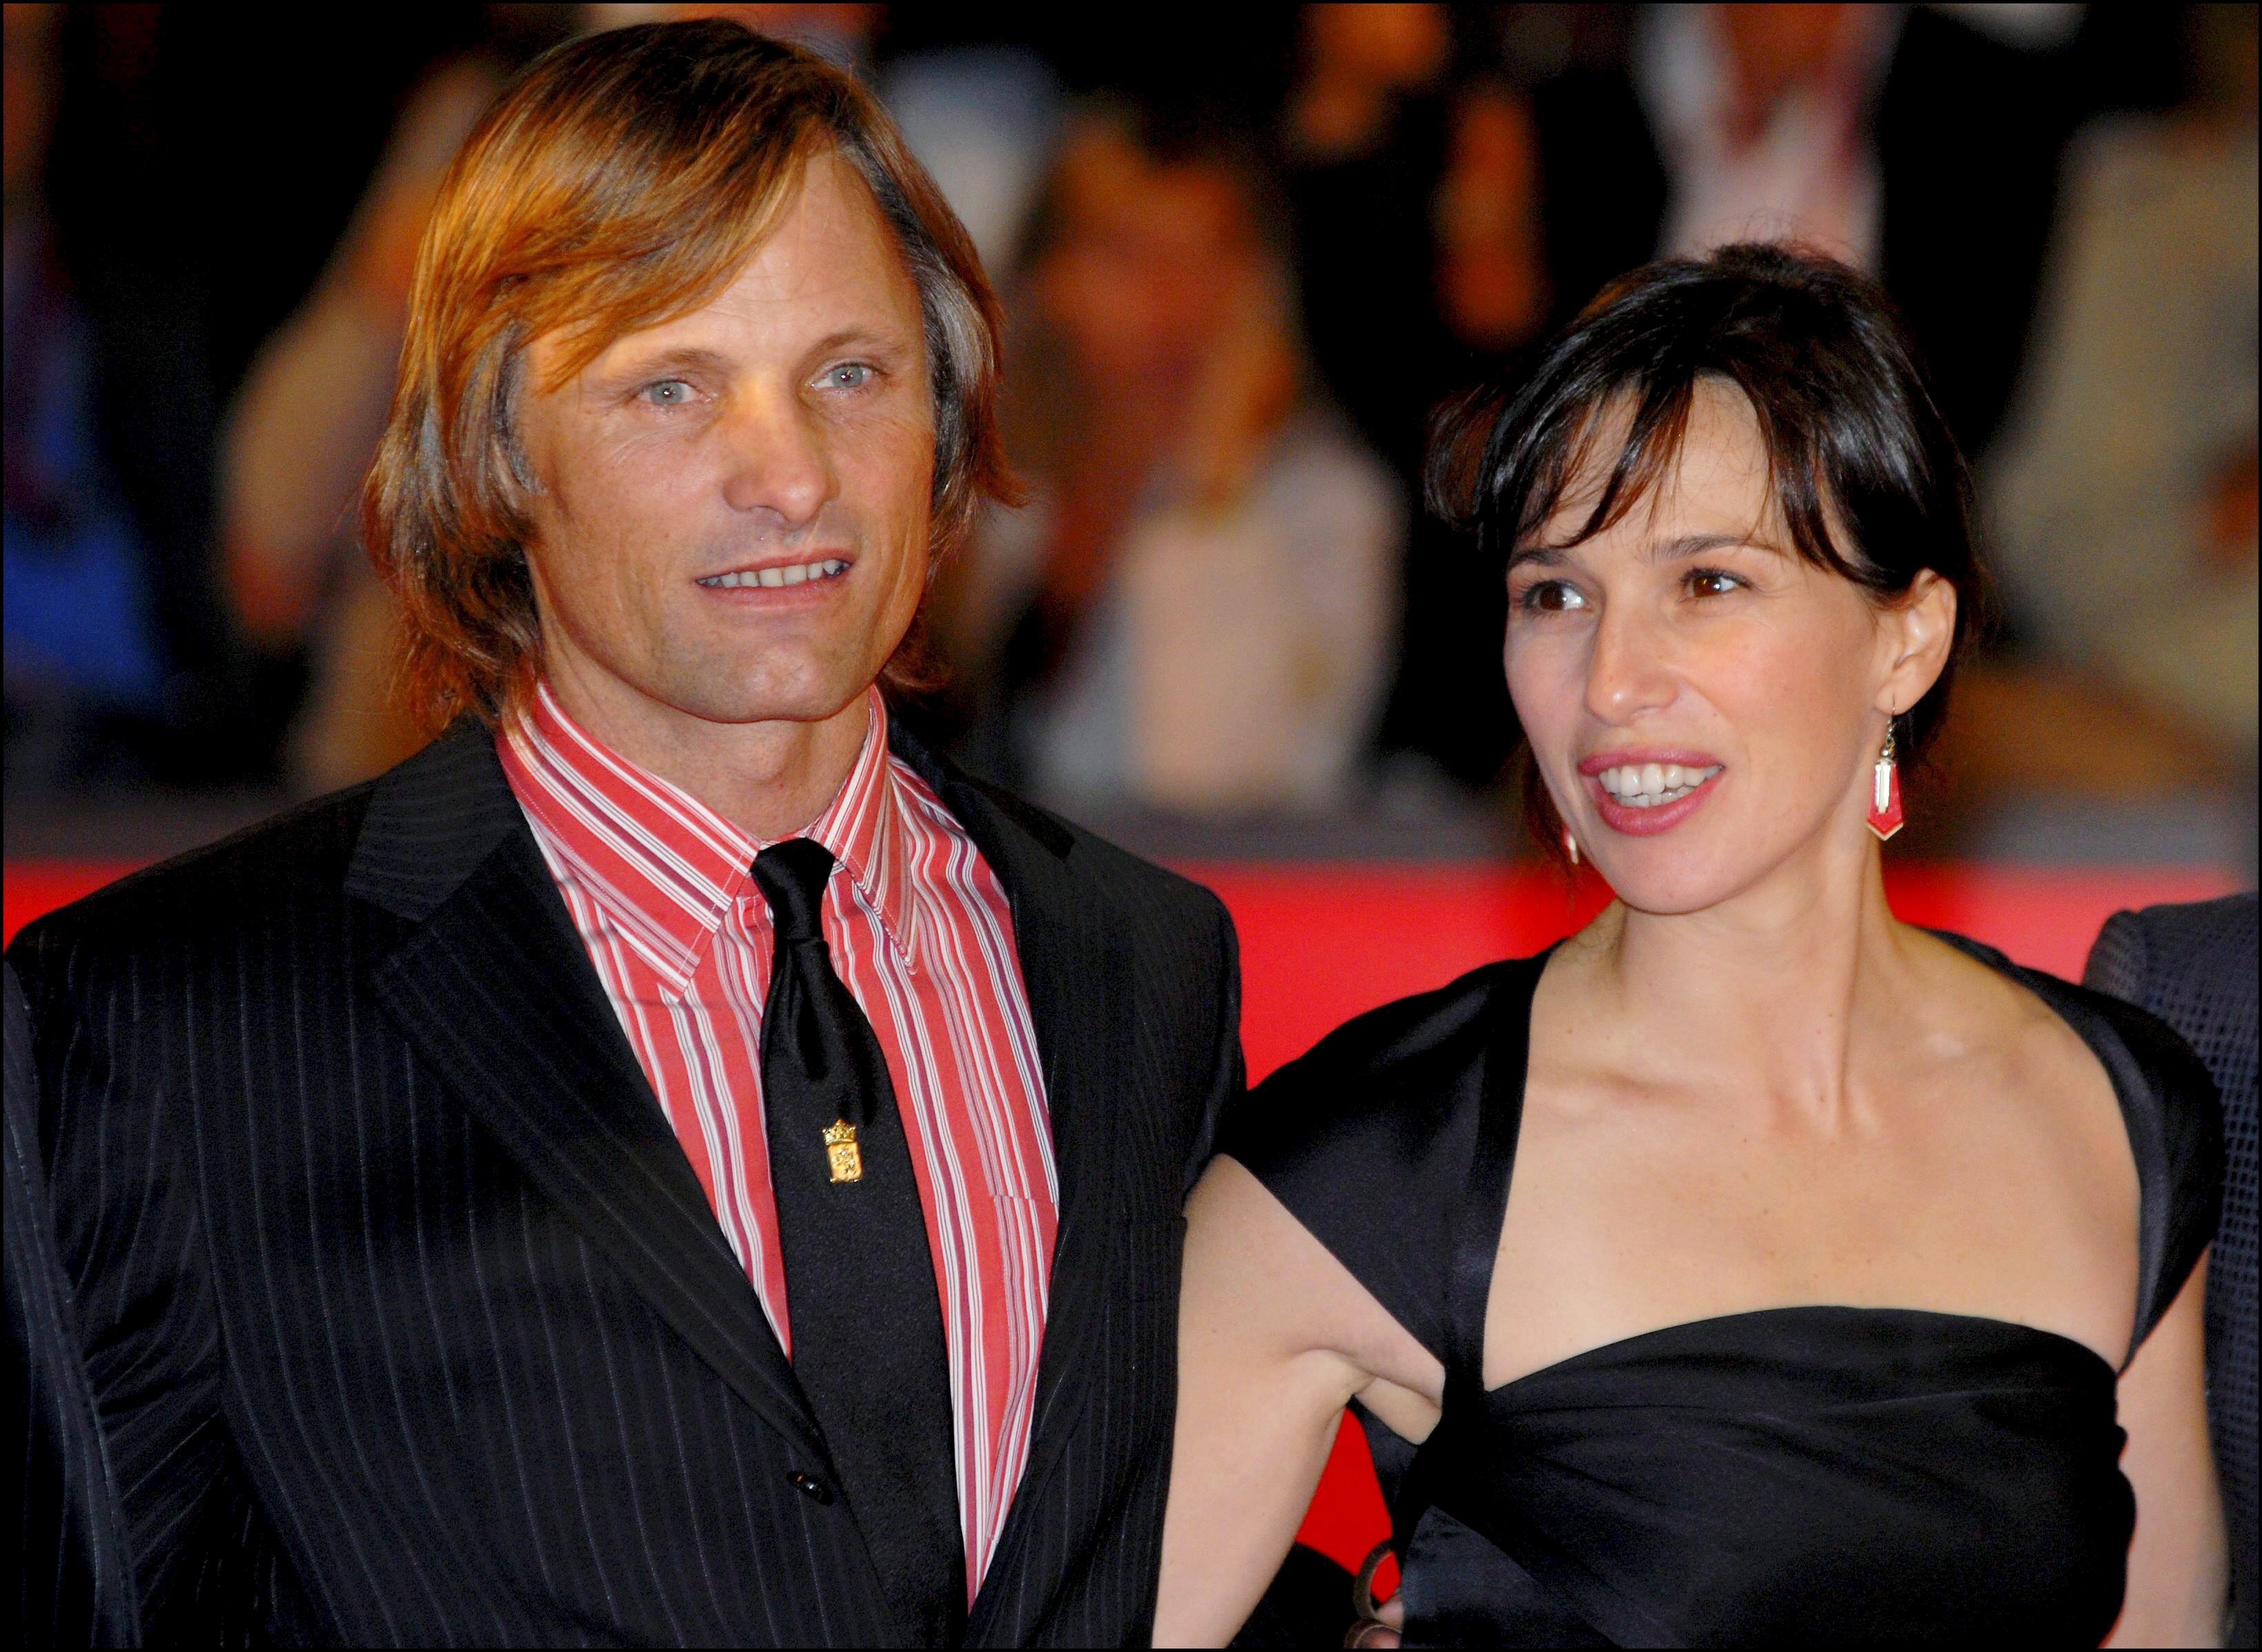 Premiere of the film 'Alatriste' by director Agustin Diaz Yanez with Viggo Mortensen, and Ariadna Gil in Rome, Italy on October 16, 2006. | Source: Getty Images